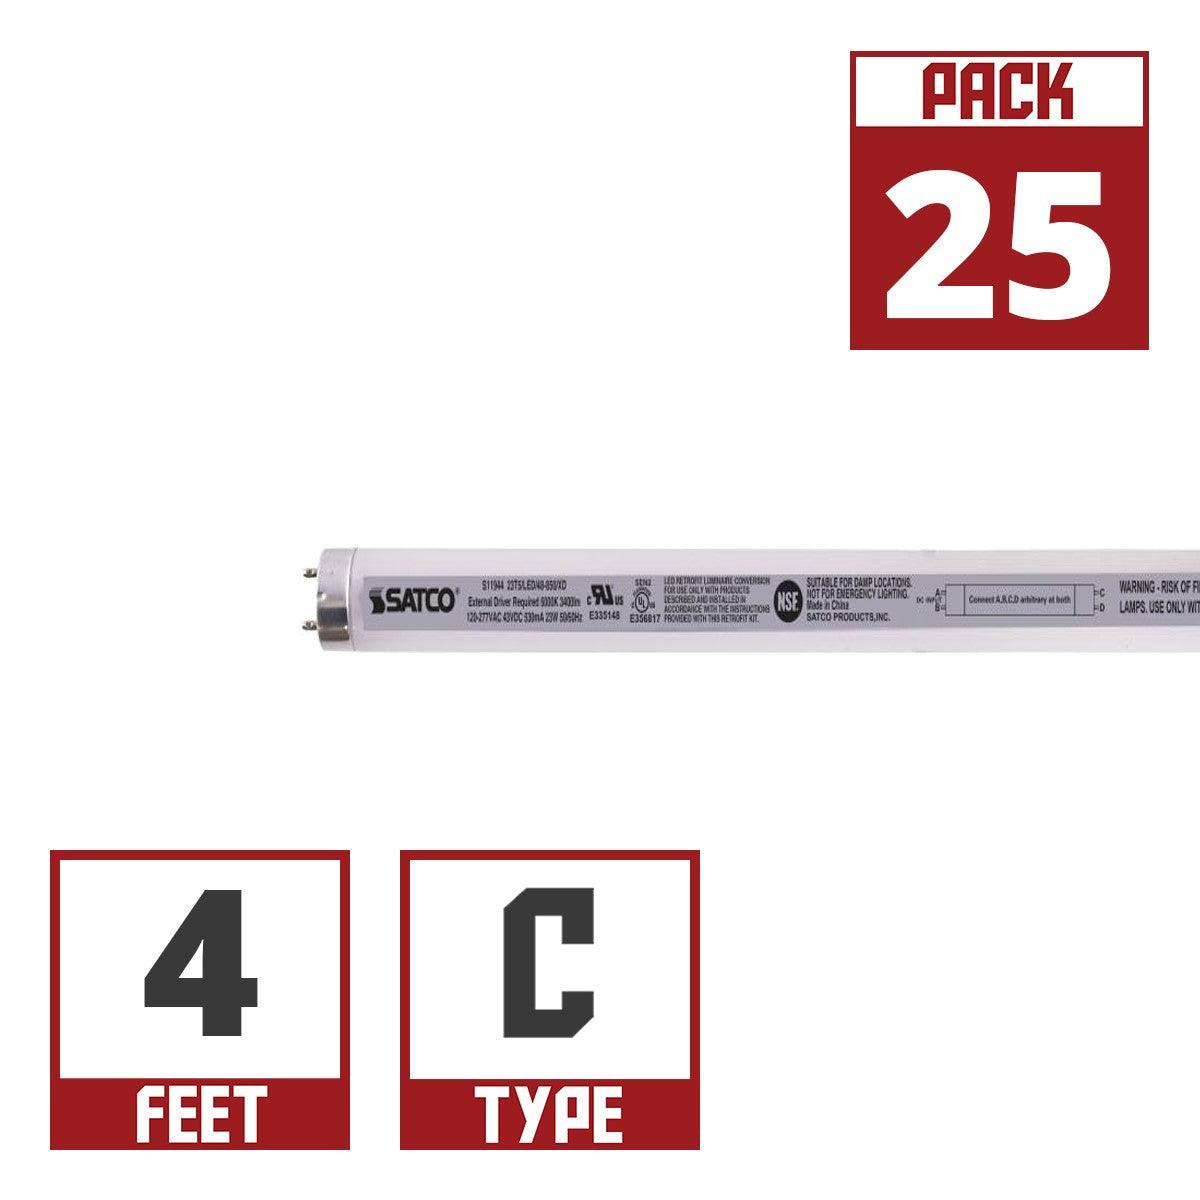 4ft LED T5 Tube, 23 Watt, 3400 Lumens, 5000K, F54T5HO Replacement, Type C External Driver Required (Case Of 25)